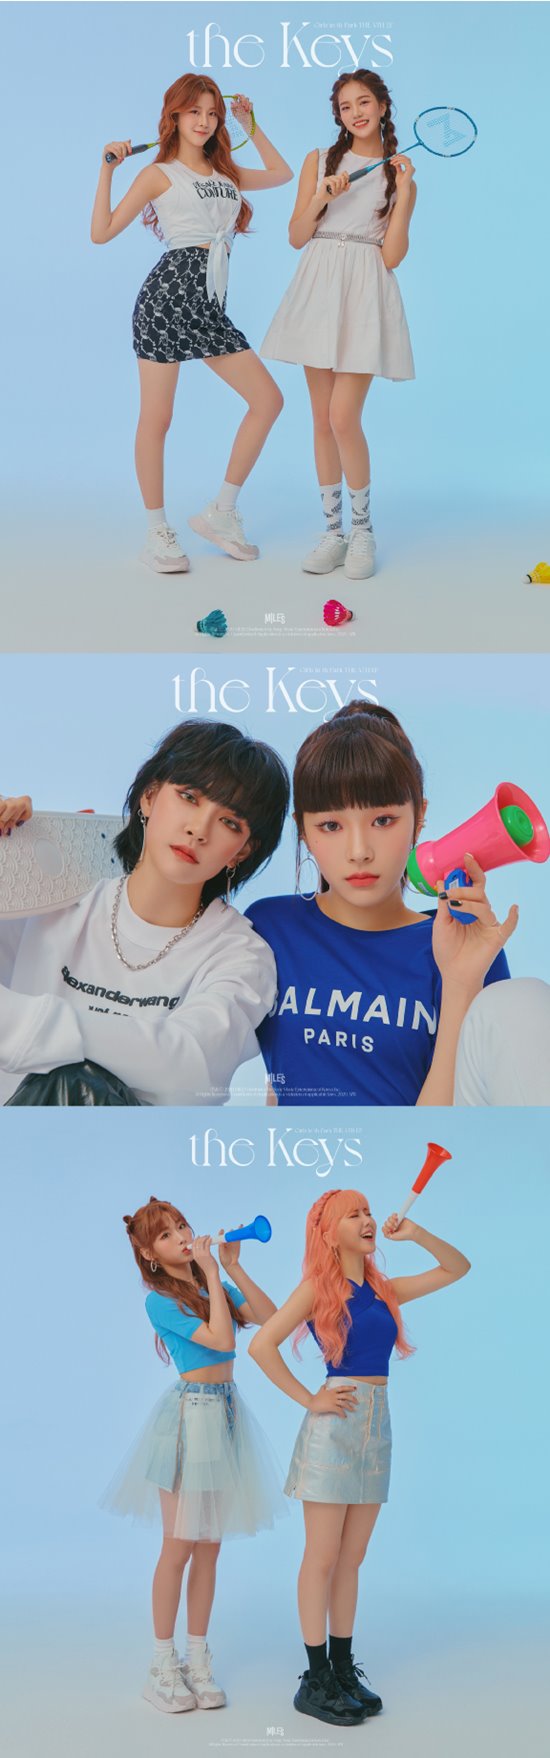 Girl group GWSN (GWSN) has unveiled a new concept photo full of refreshing sensation.GWSN released its fourth EP album The Keys (The Kids), which will be released on the 28th through the official SNS channel, the second concept photo PHOTOGRAPHS in blue group and unit cut.GWSN, which showed a thicker feminine beauty than before in the first concept photo PHOTOGRAPHS in red, boasted a visual full of refreshing feeling that is comparable to the ion beverage AD picture through the second concept photo.The group cut featured a GWSN that emits a sporty and bright atmosphere.The combination of the members wearing blue/white color-based costumes and the refreshing sky blue background gave a cool feeling.GWSN has created a more active charm through unit cuts taken by two members.With badminton rackets, the fans have raised their expectations for a comeback with different concepts, including democracy and rena, which appeal to a healthy image, Miya and Anne, who boast a unique force like a model in a picture, and Seoryeong and Seogyeong, who catch their attention with cute visuals like fairy.GWSNs fourth EP album The Keys, which foresaw a completely new concept and style, will be released simultaneously at 6 pm on the 28th at home and abroad online music sites.Photo: Miles